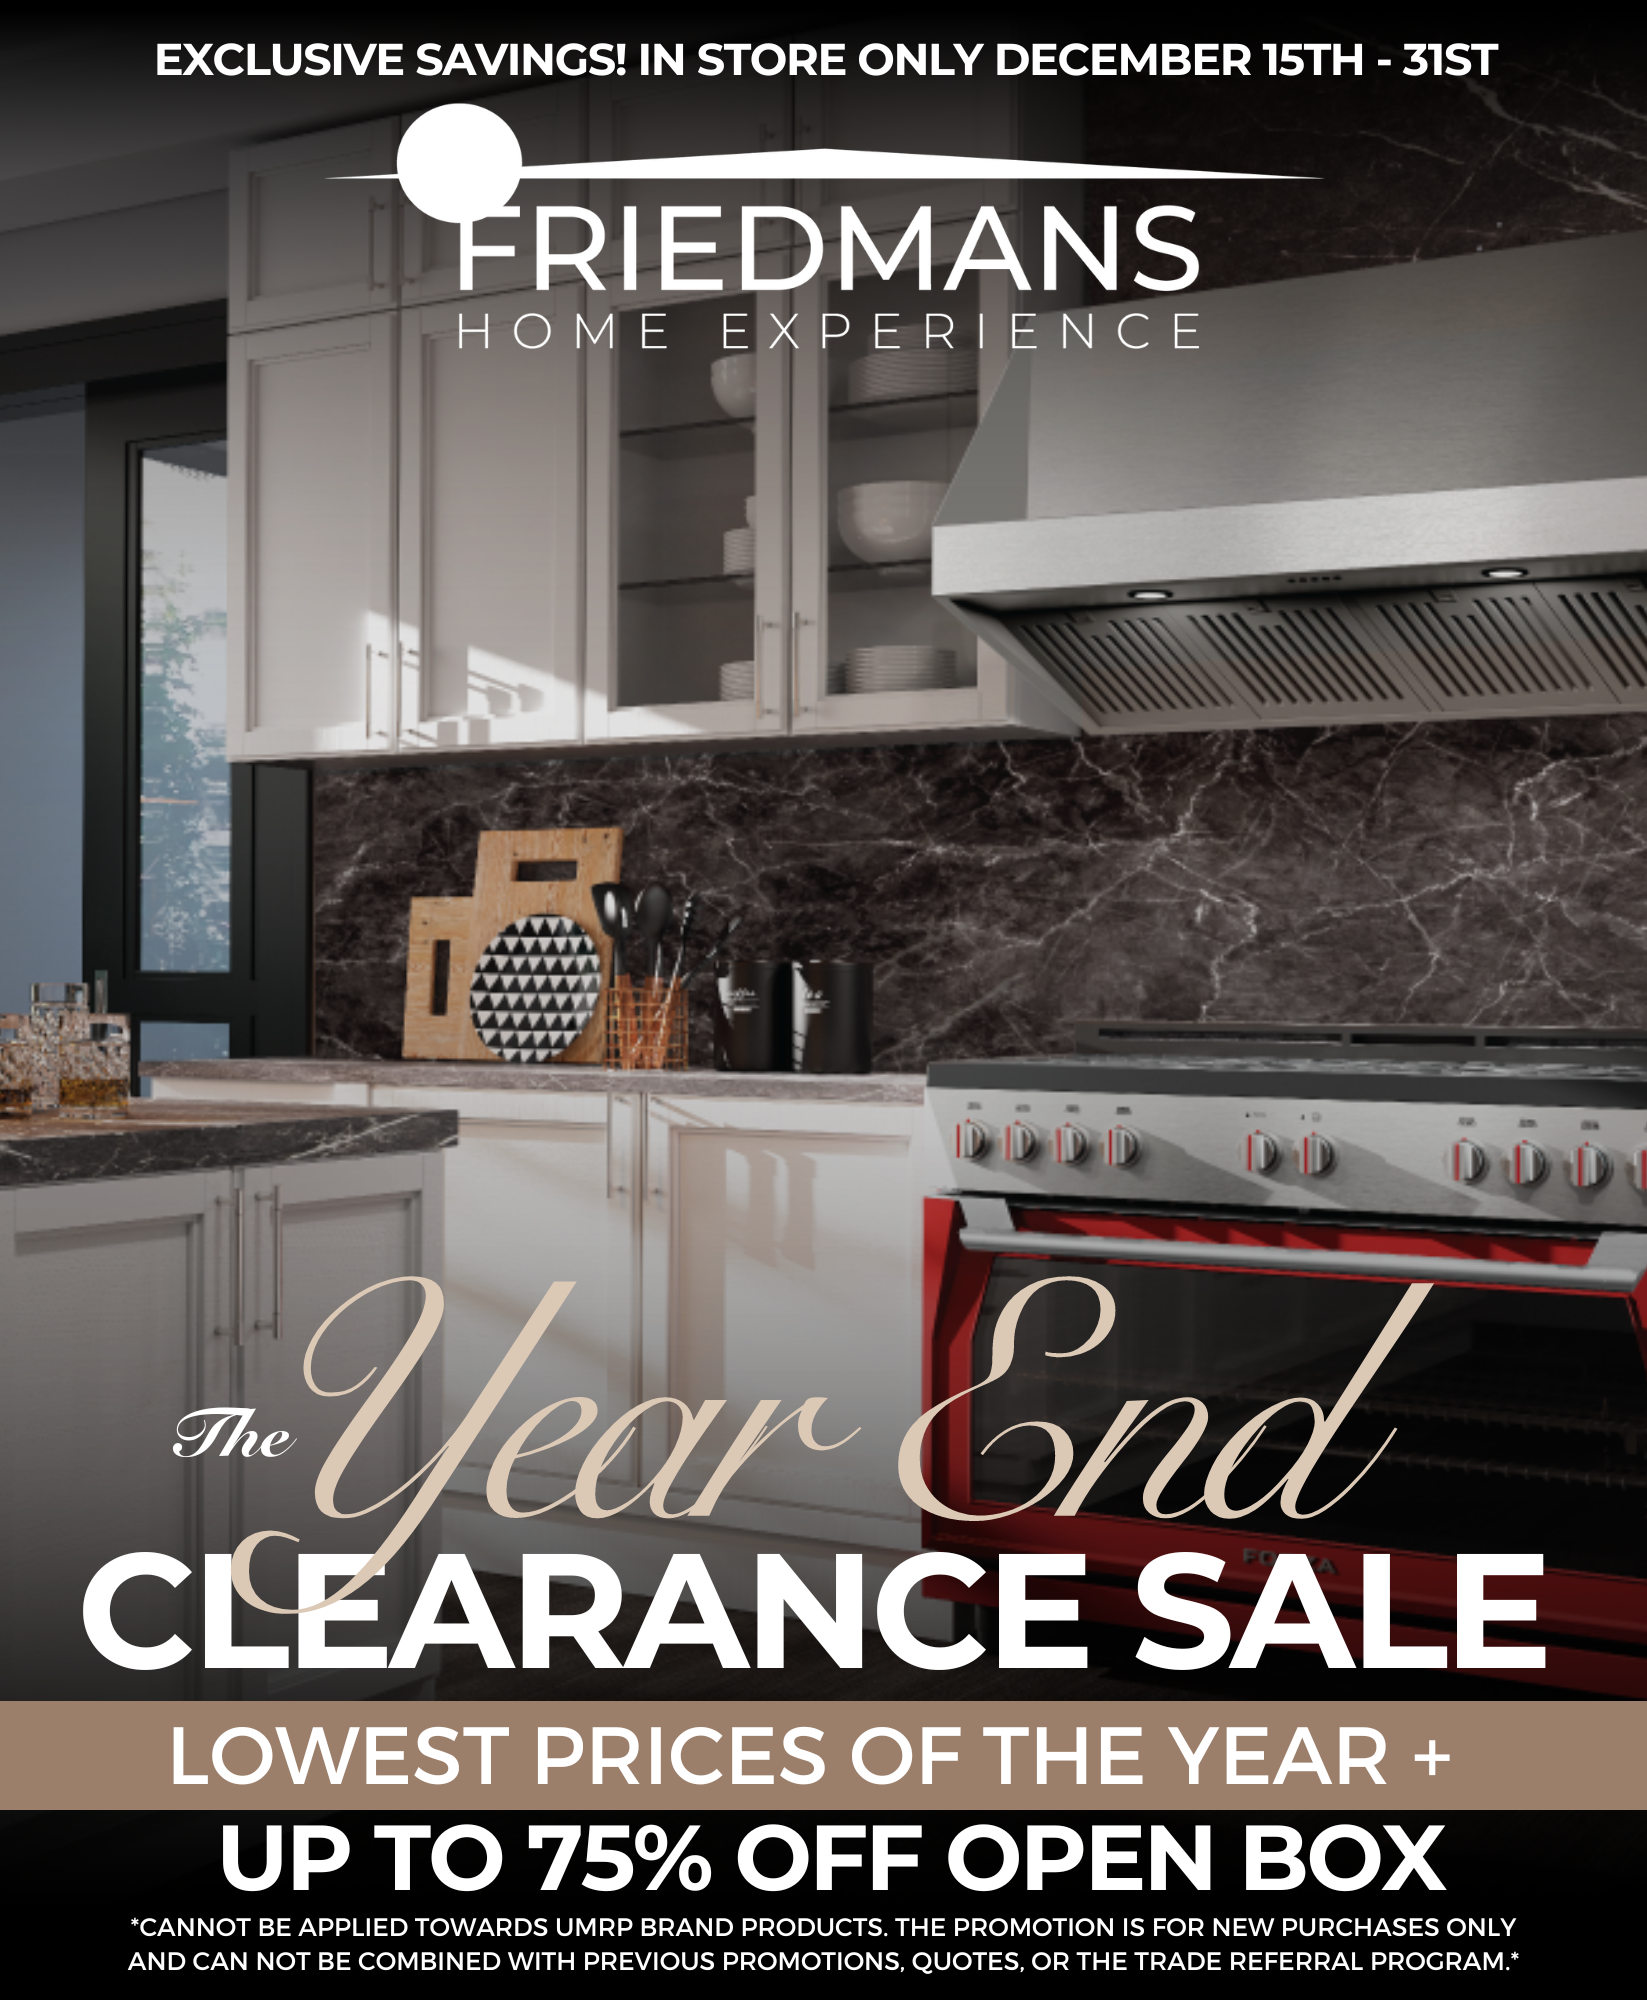 https://d12mivgeuoigbq.cloudfront.net/magento-media/members/d0044-friedmans-home-experience/br_D0044_year-end-clearance-sale_st.png